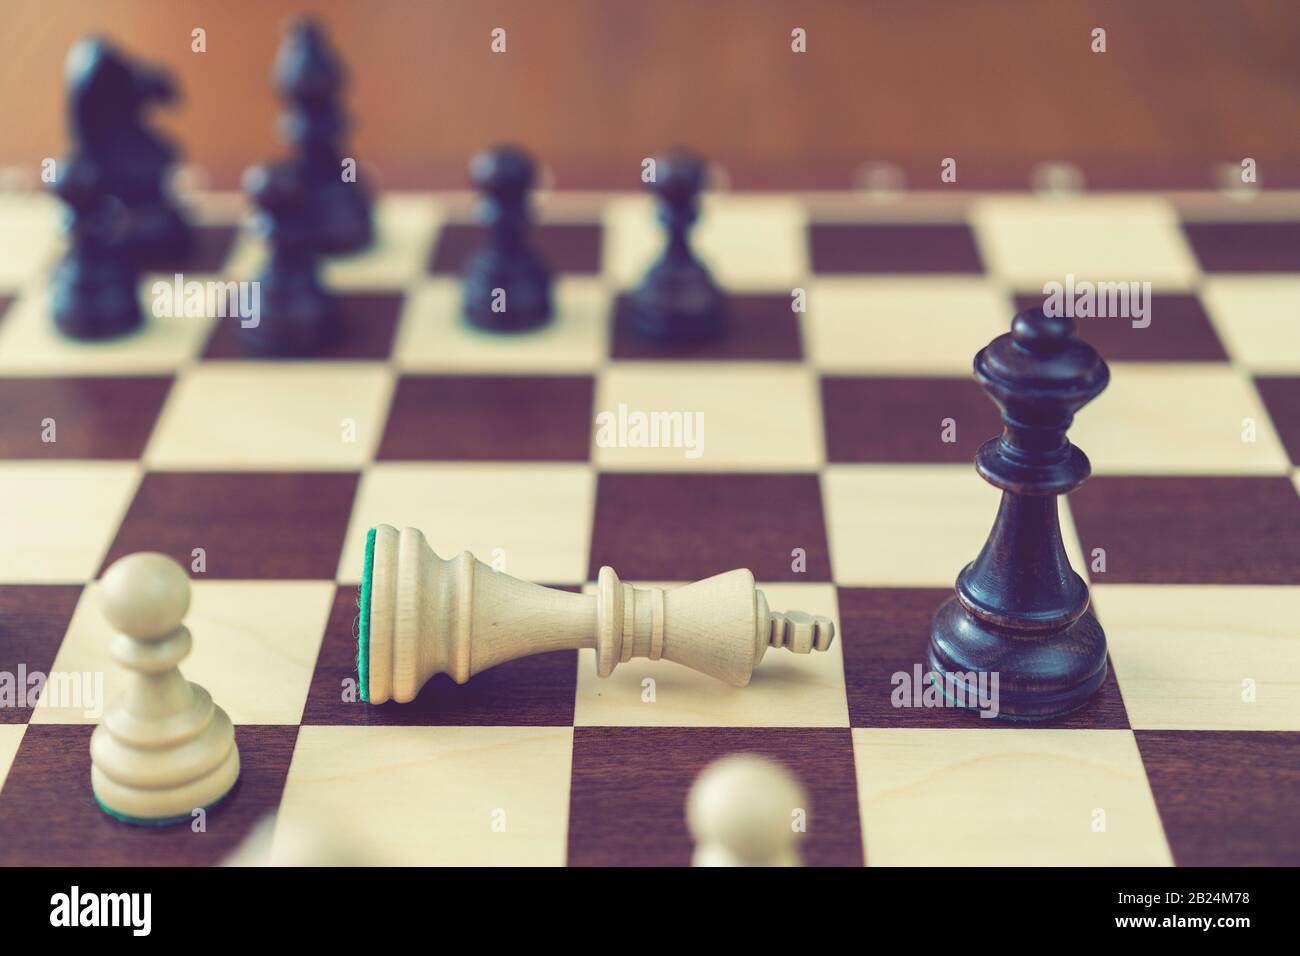 Concept of defeat, fallen king, camera focus on white king chess piece,  background blurred. chess board with chess wooden pieces. toned Stock Photo  - Alamy